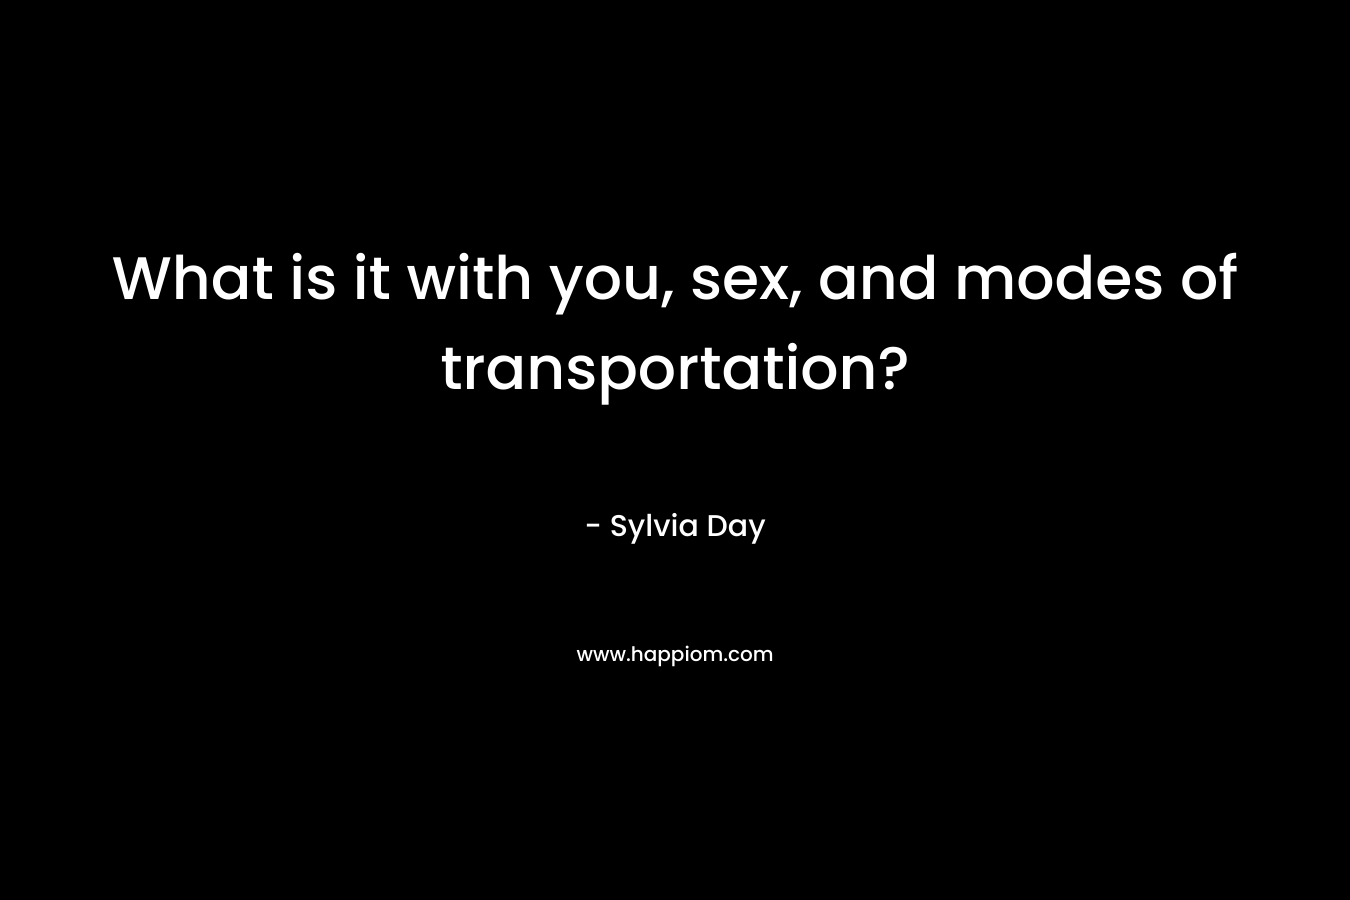 What is it with you, sex, and modes of transportation?